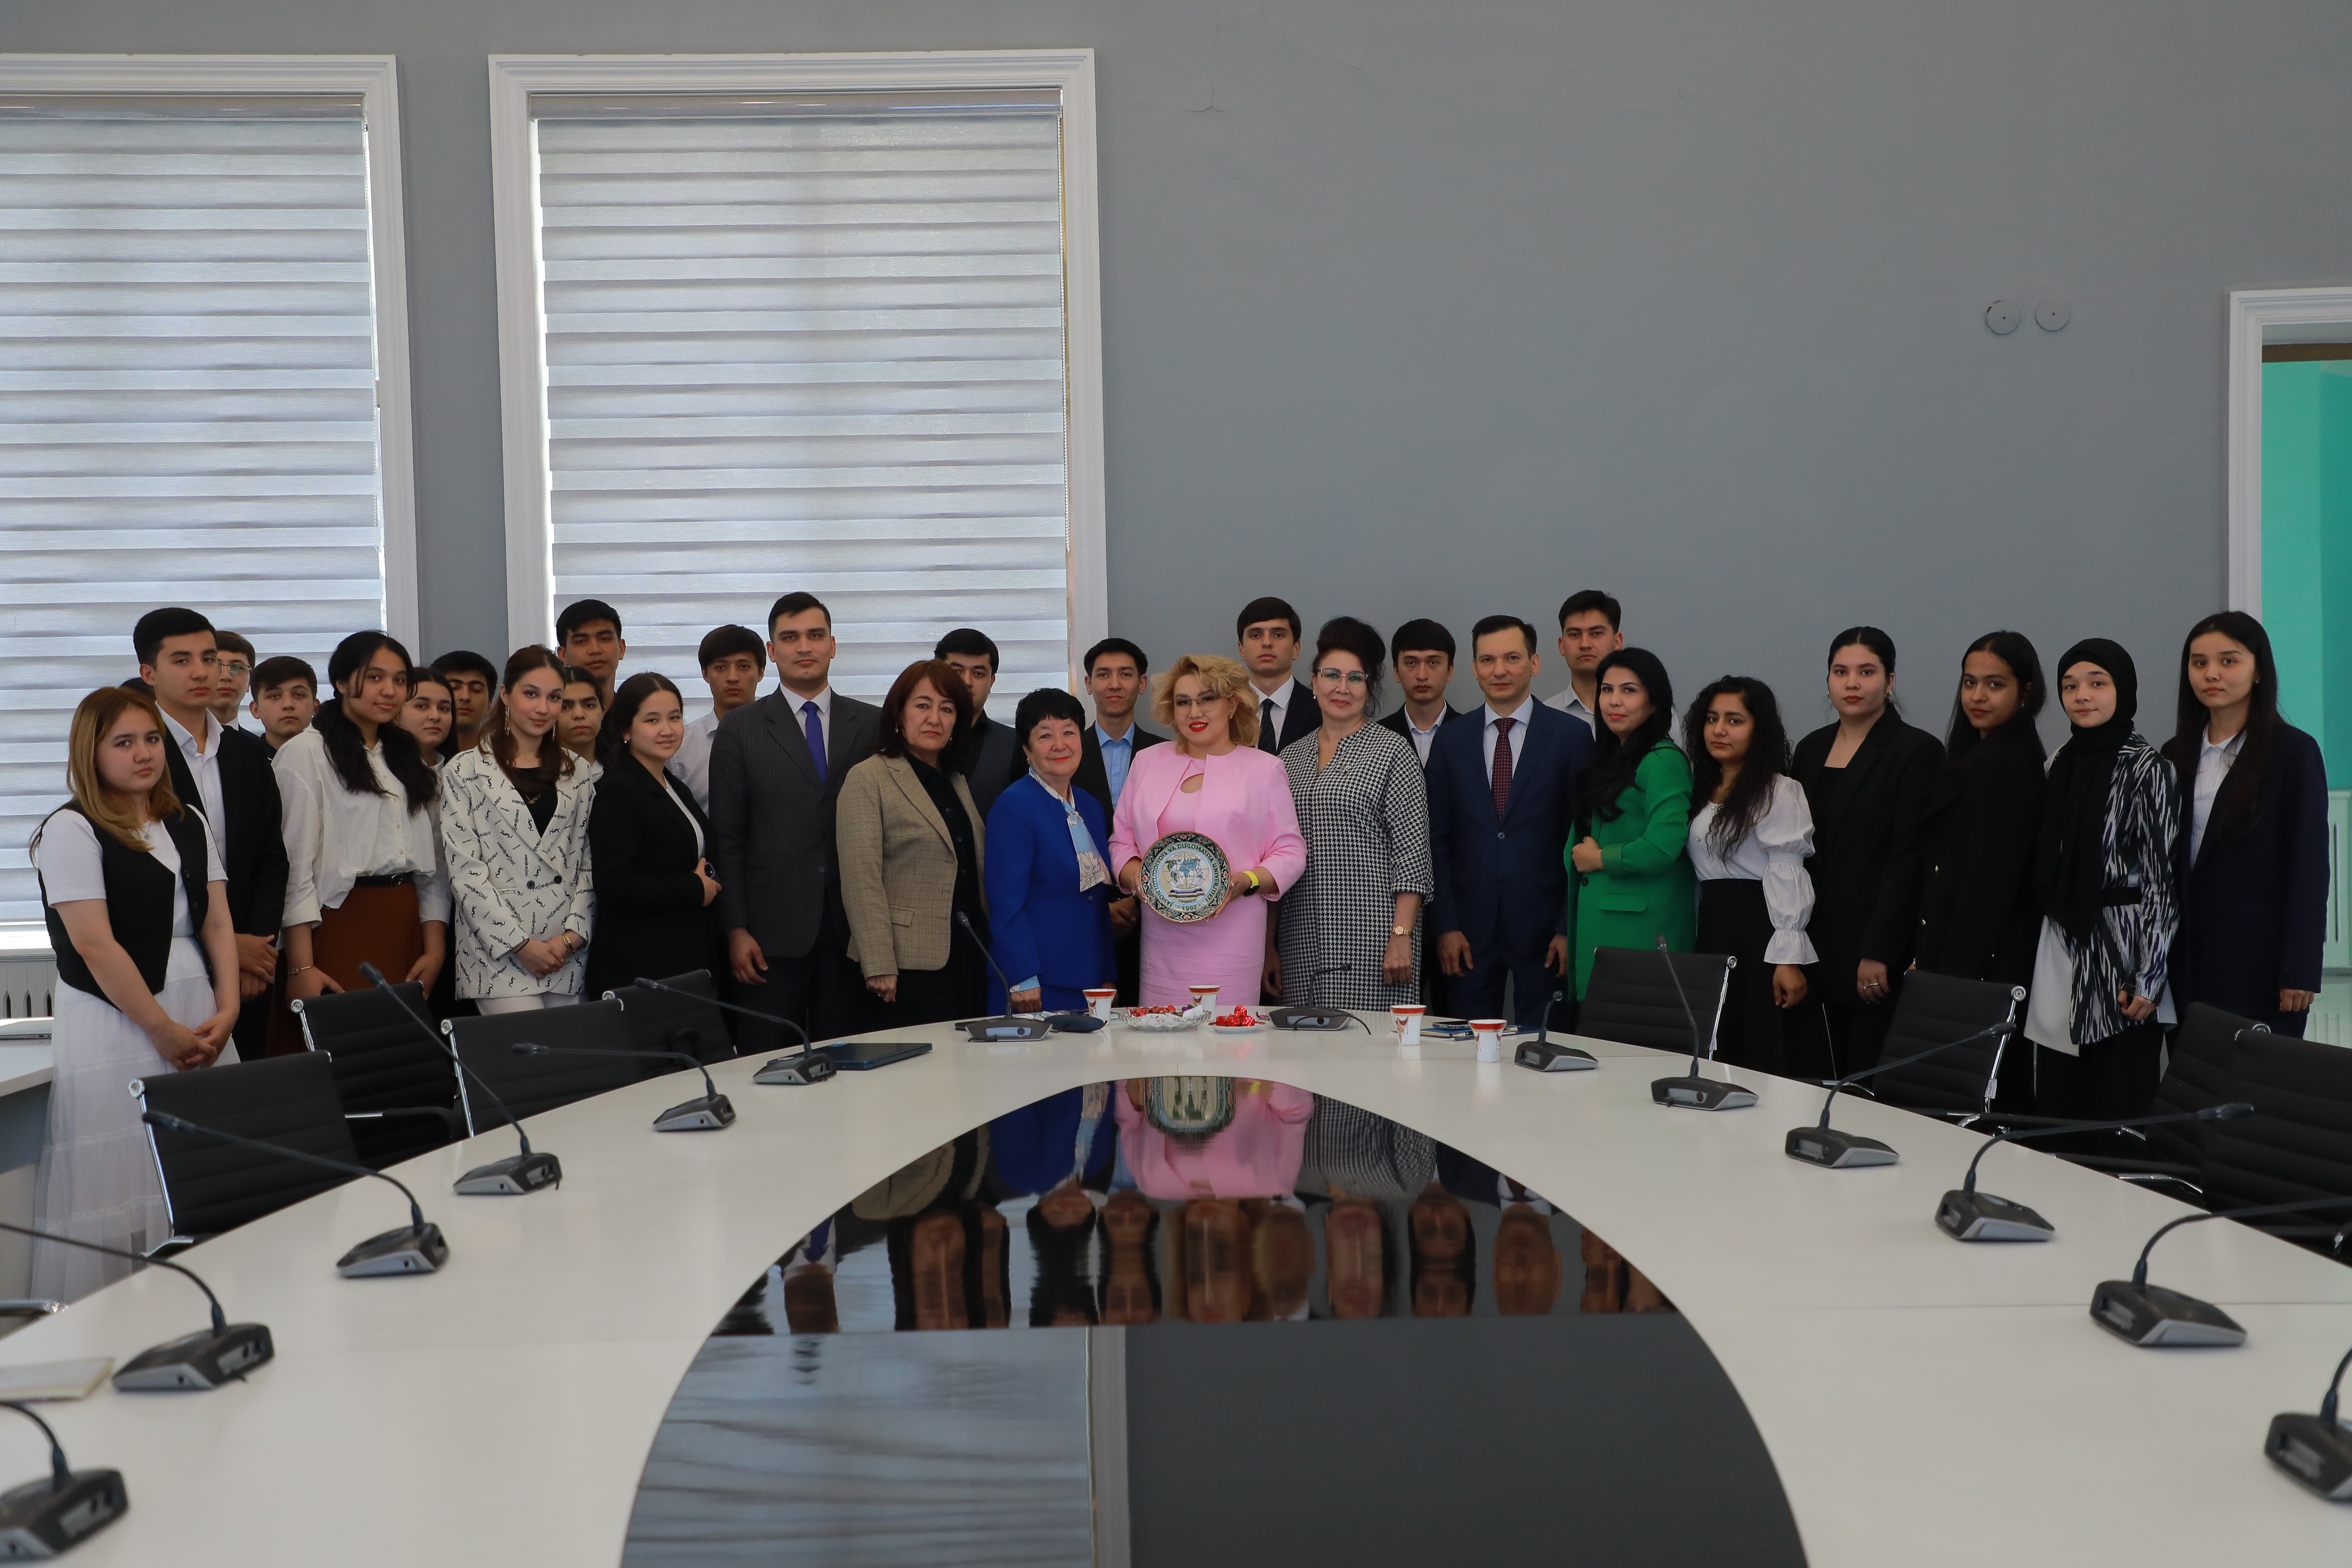 A meeting with an honorary member of the Women’s Congress of Kyrgyz Republic took place at UWED